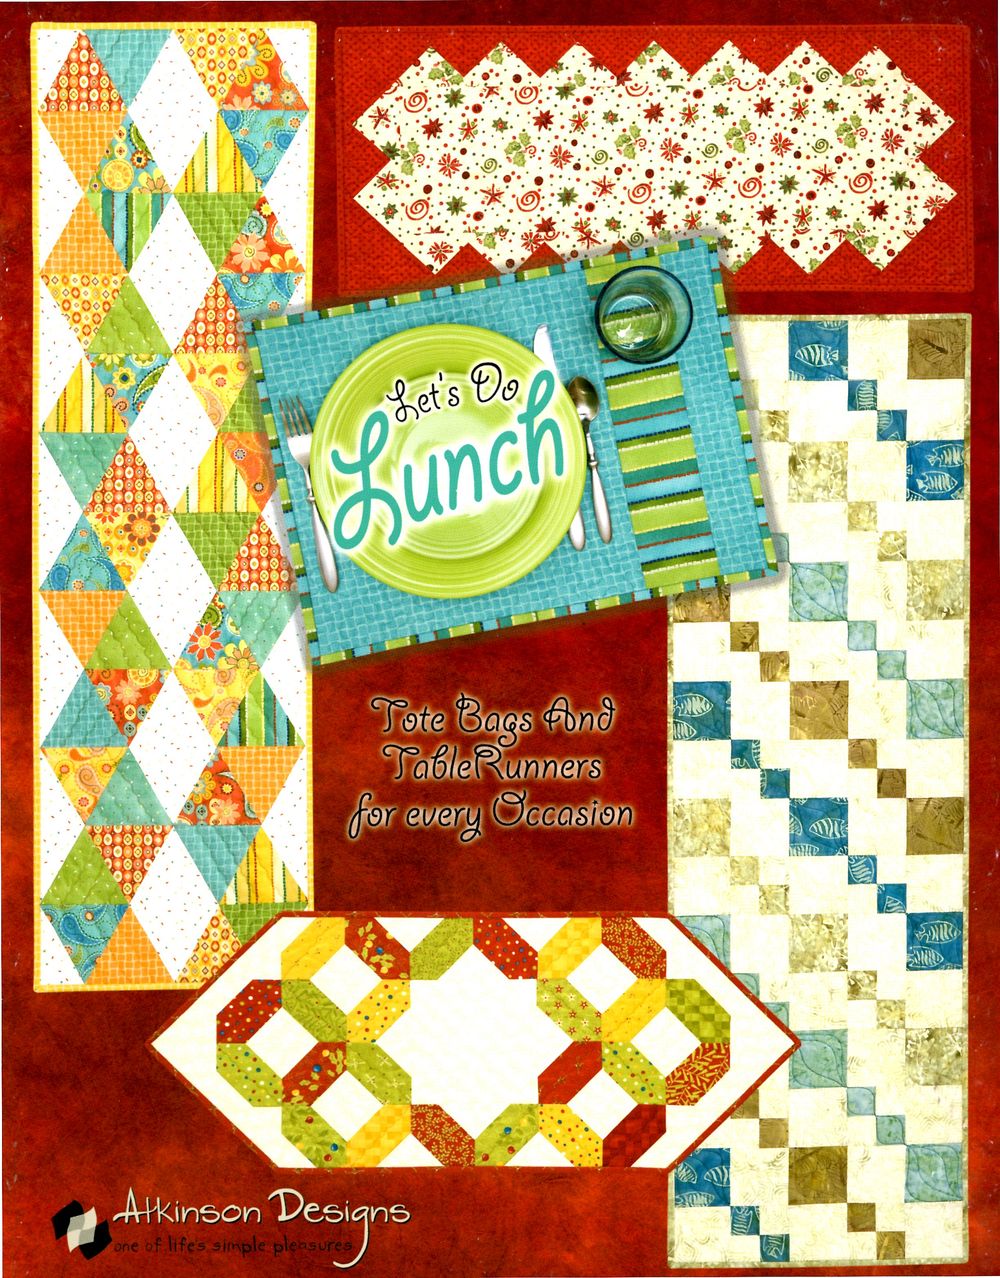 Let's Do Lunch Quilt and Sewing Pattern Book by Terry Atkinson of Atkinson Designs